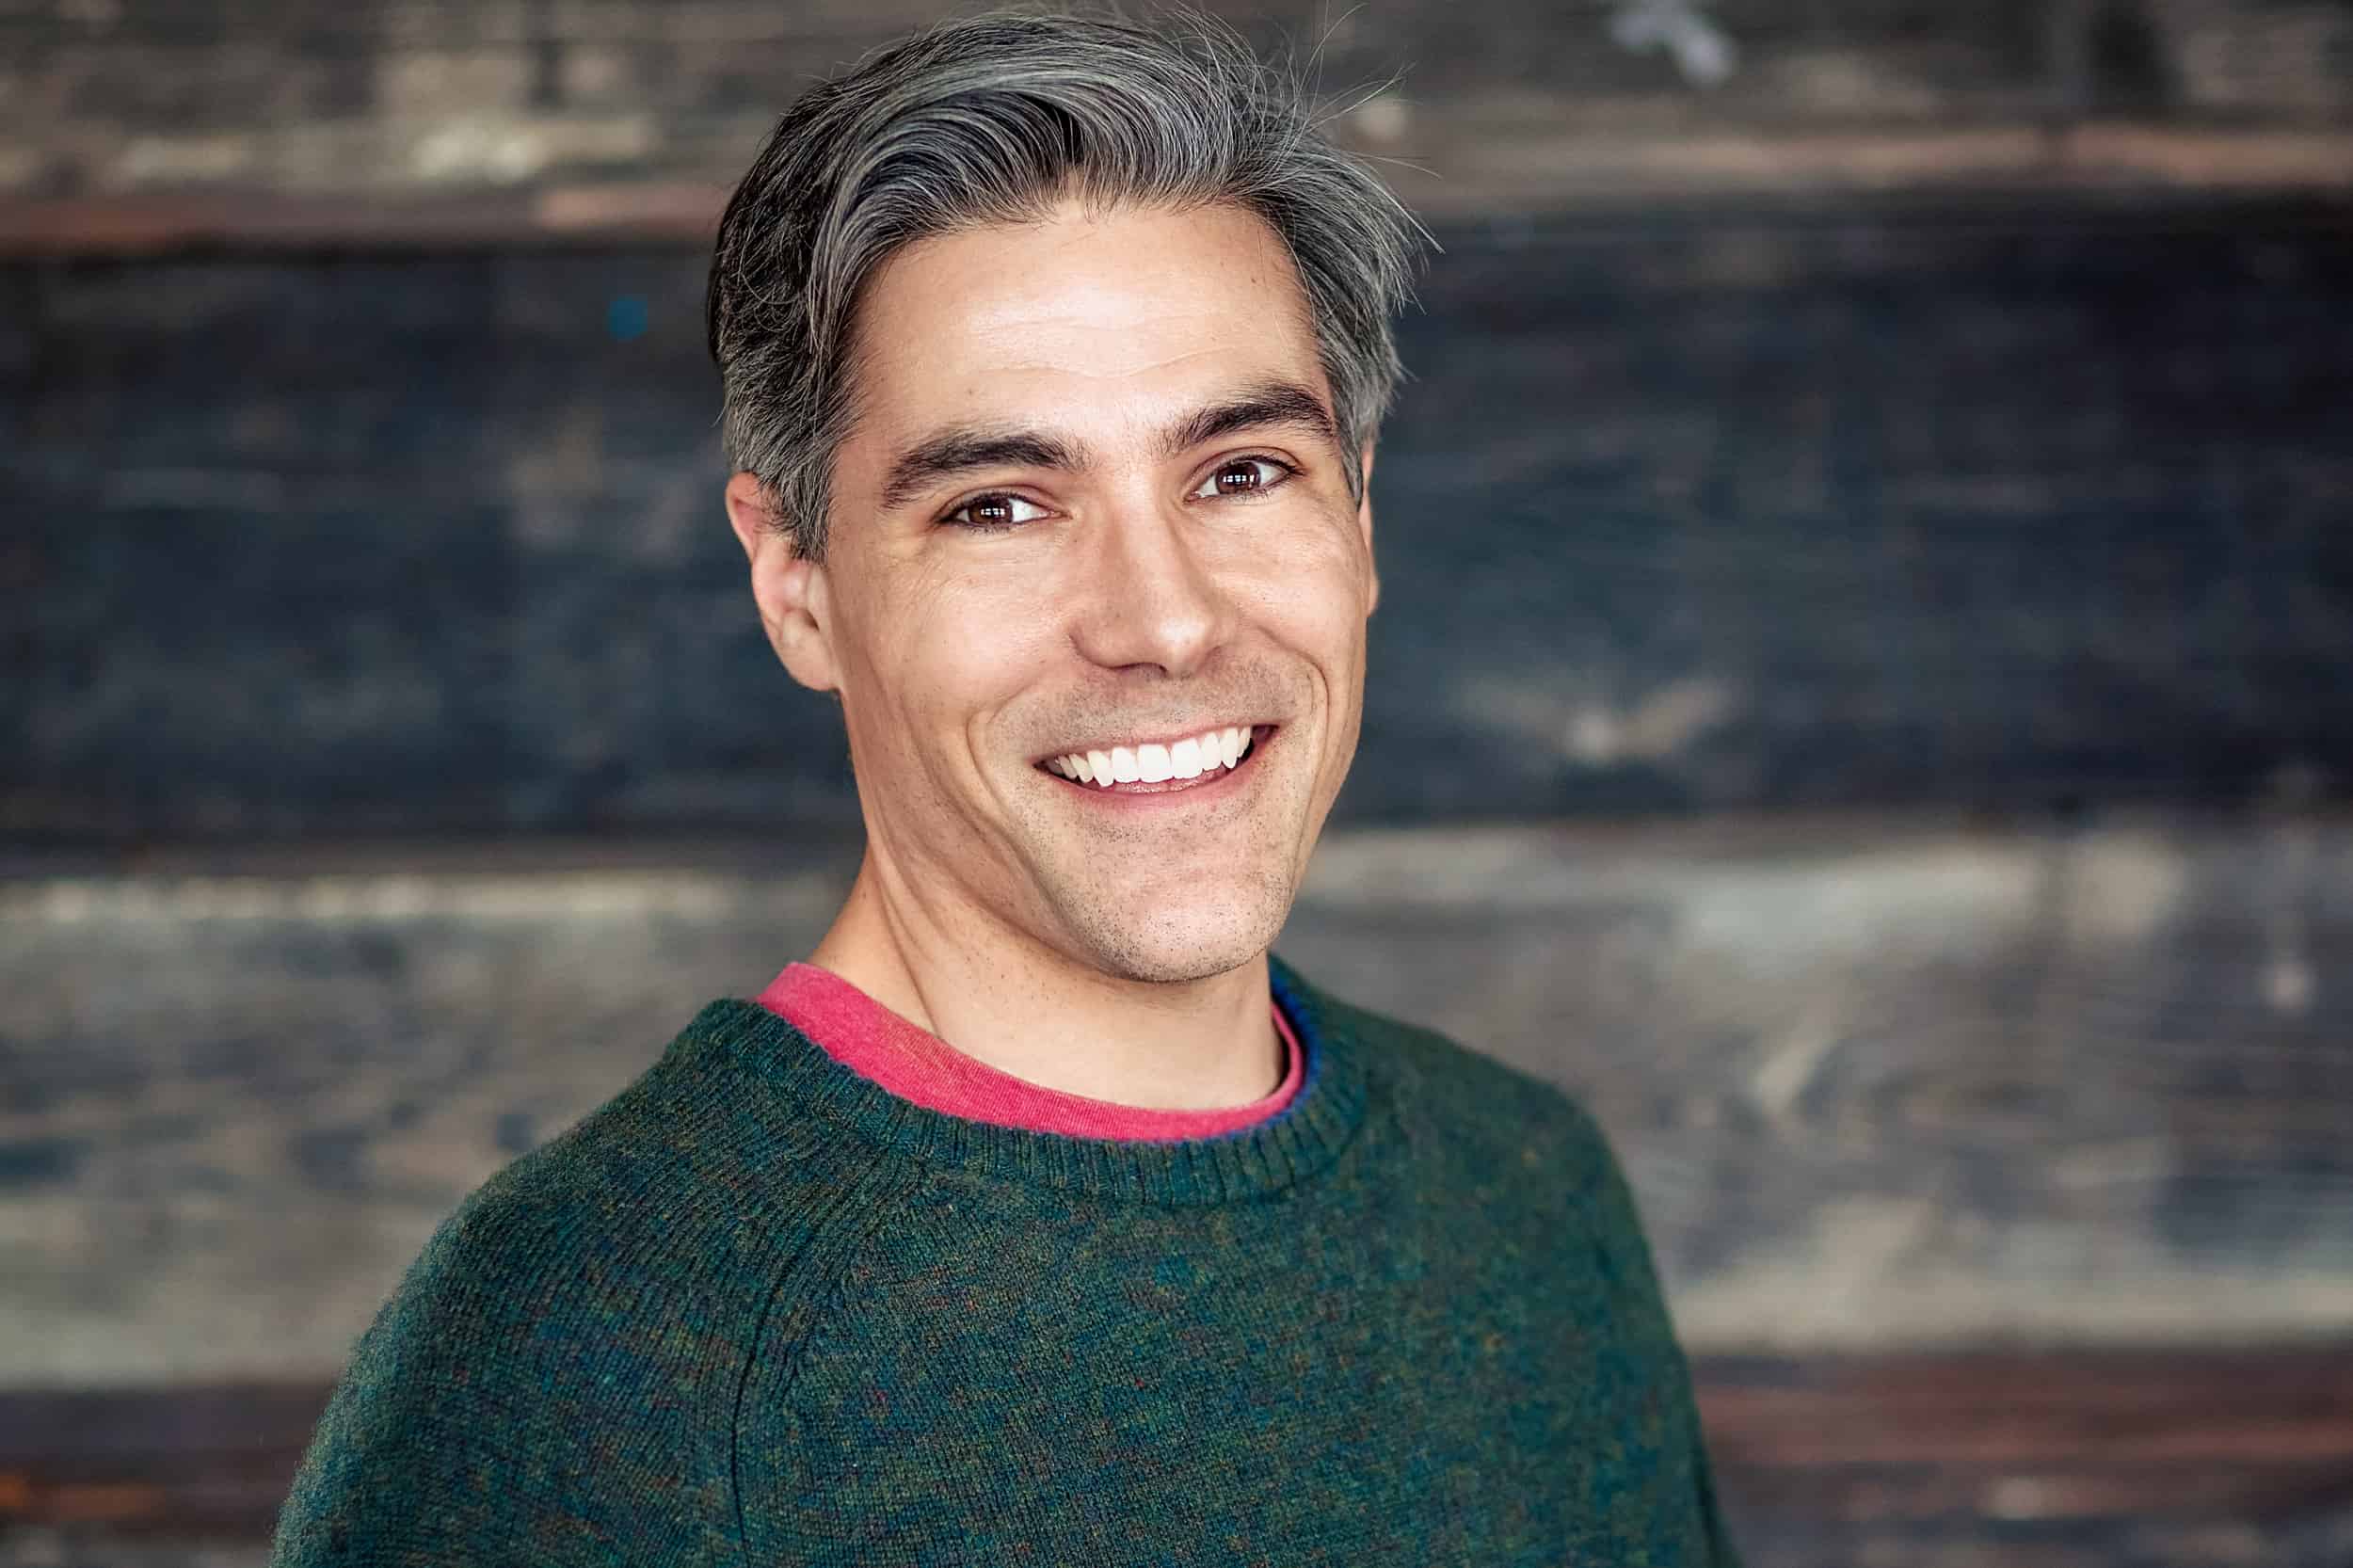 A man in a green sweater smiles in front of a wooden wall.